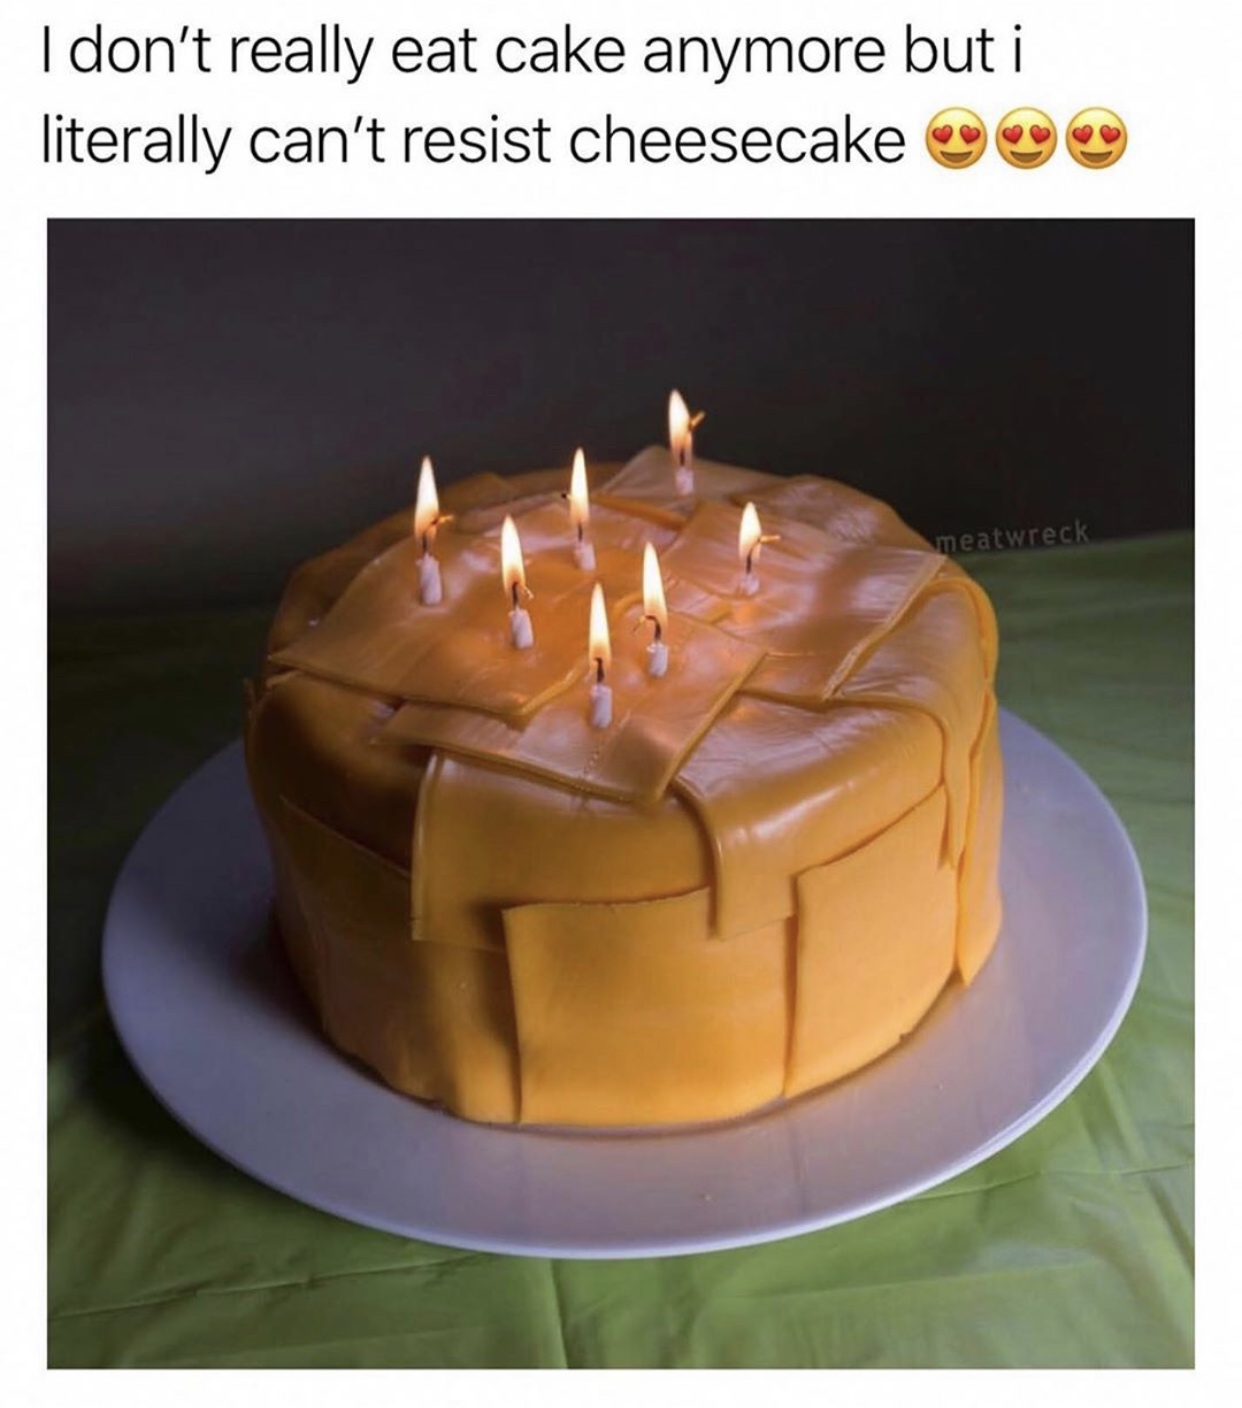 cheese cake meme - I don't really eat cake anymore but i literally can...